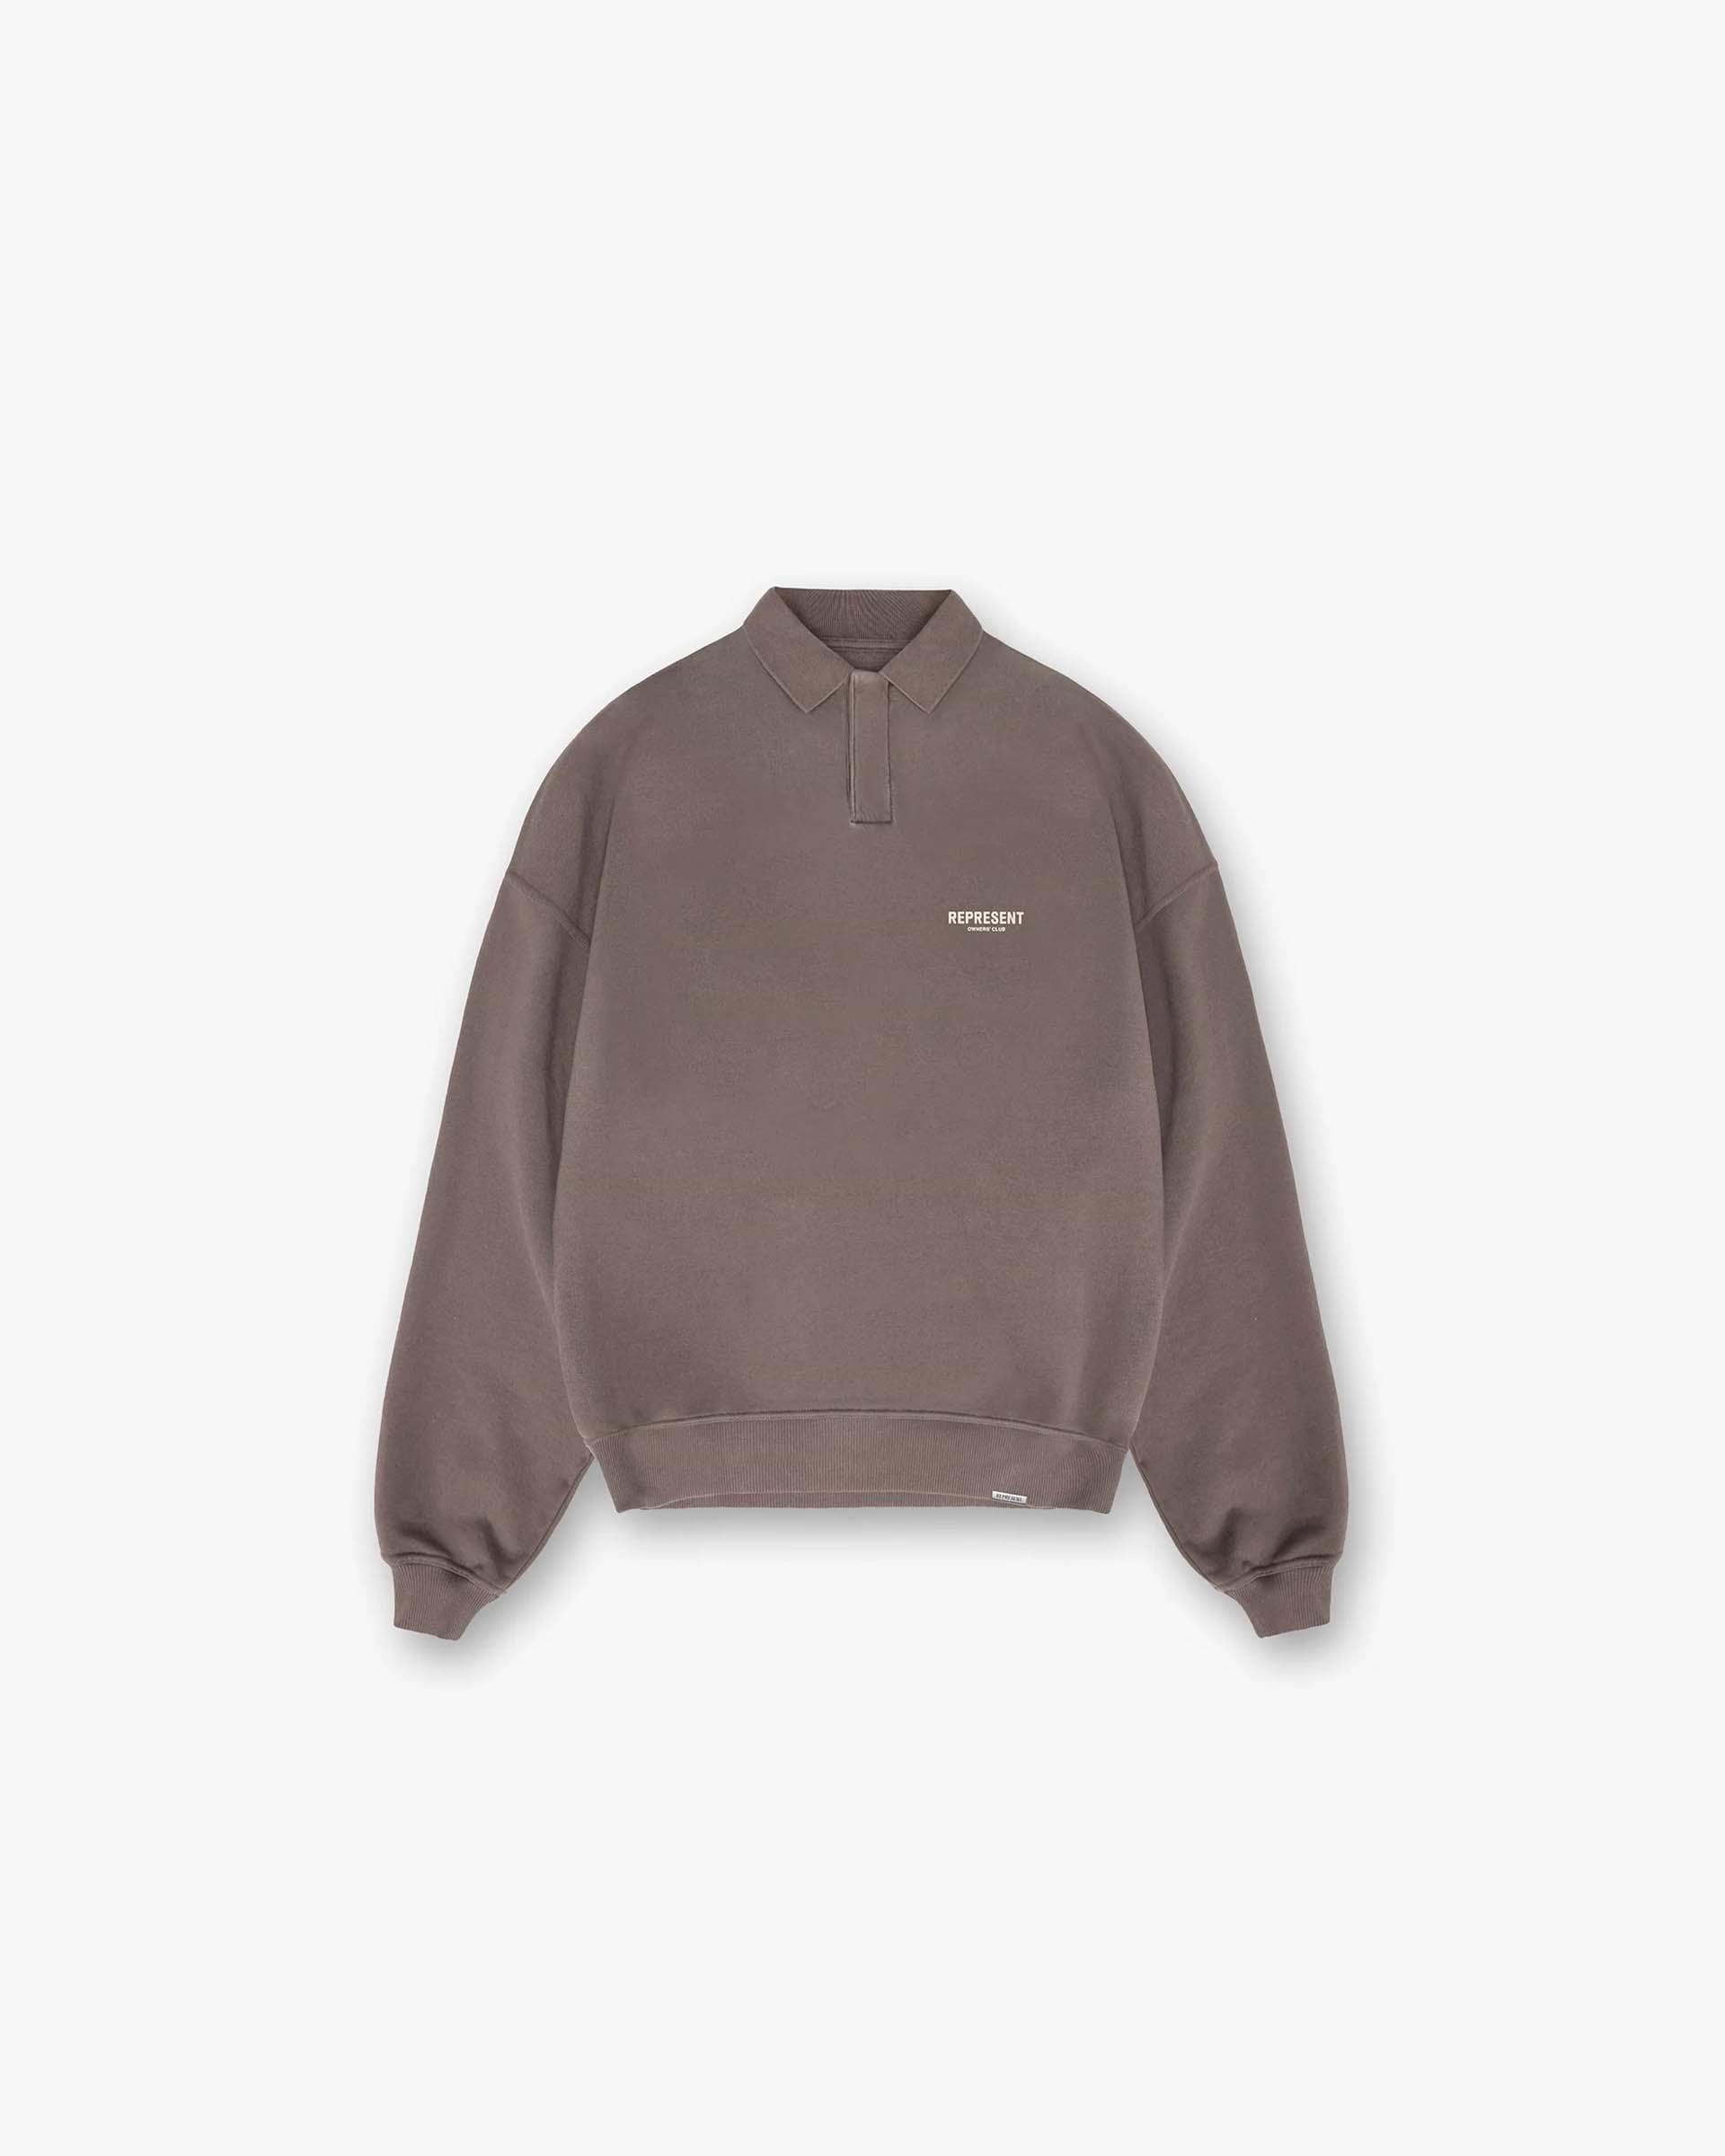 Represent Owners Club Long Sleeve Polo Sweater - Fog